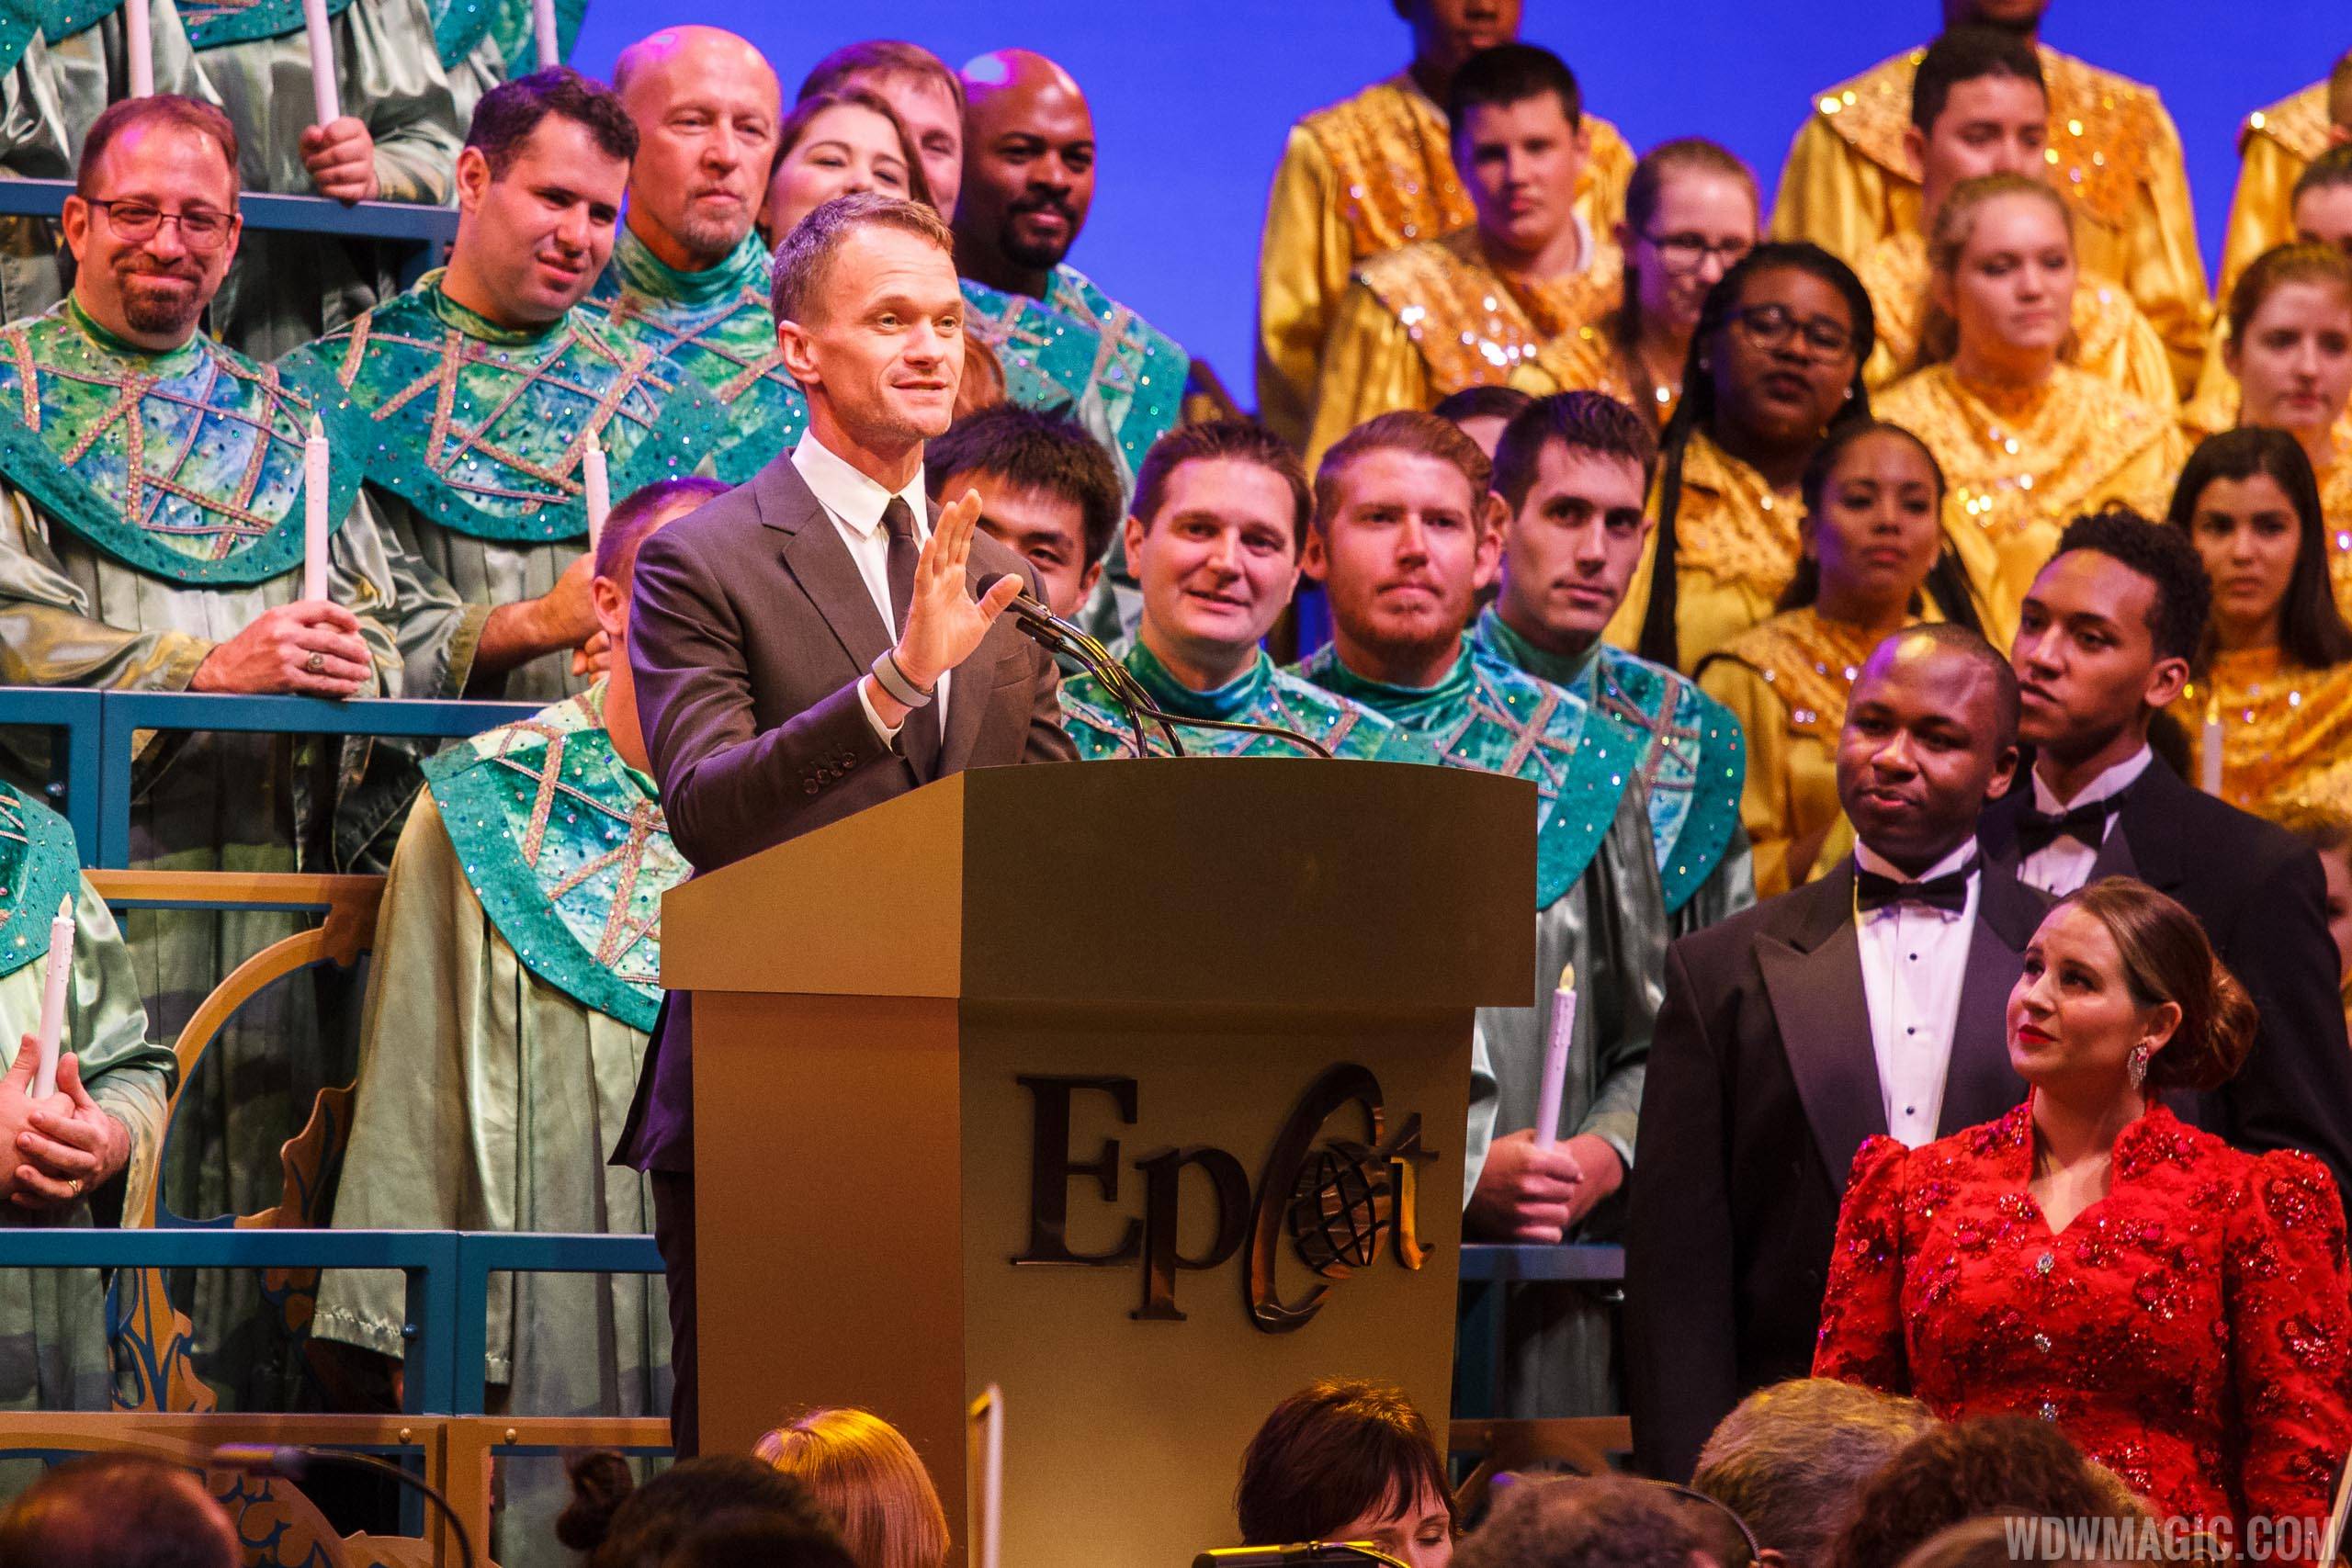 More narrators added to the Candlelight Processional celebrity line-up